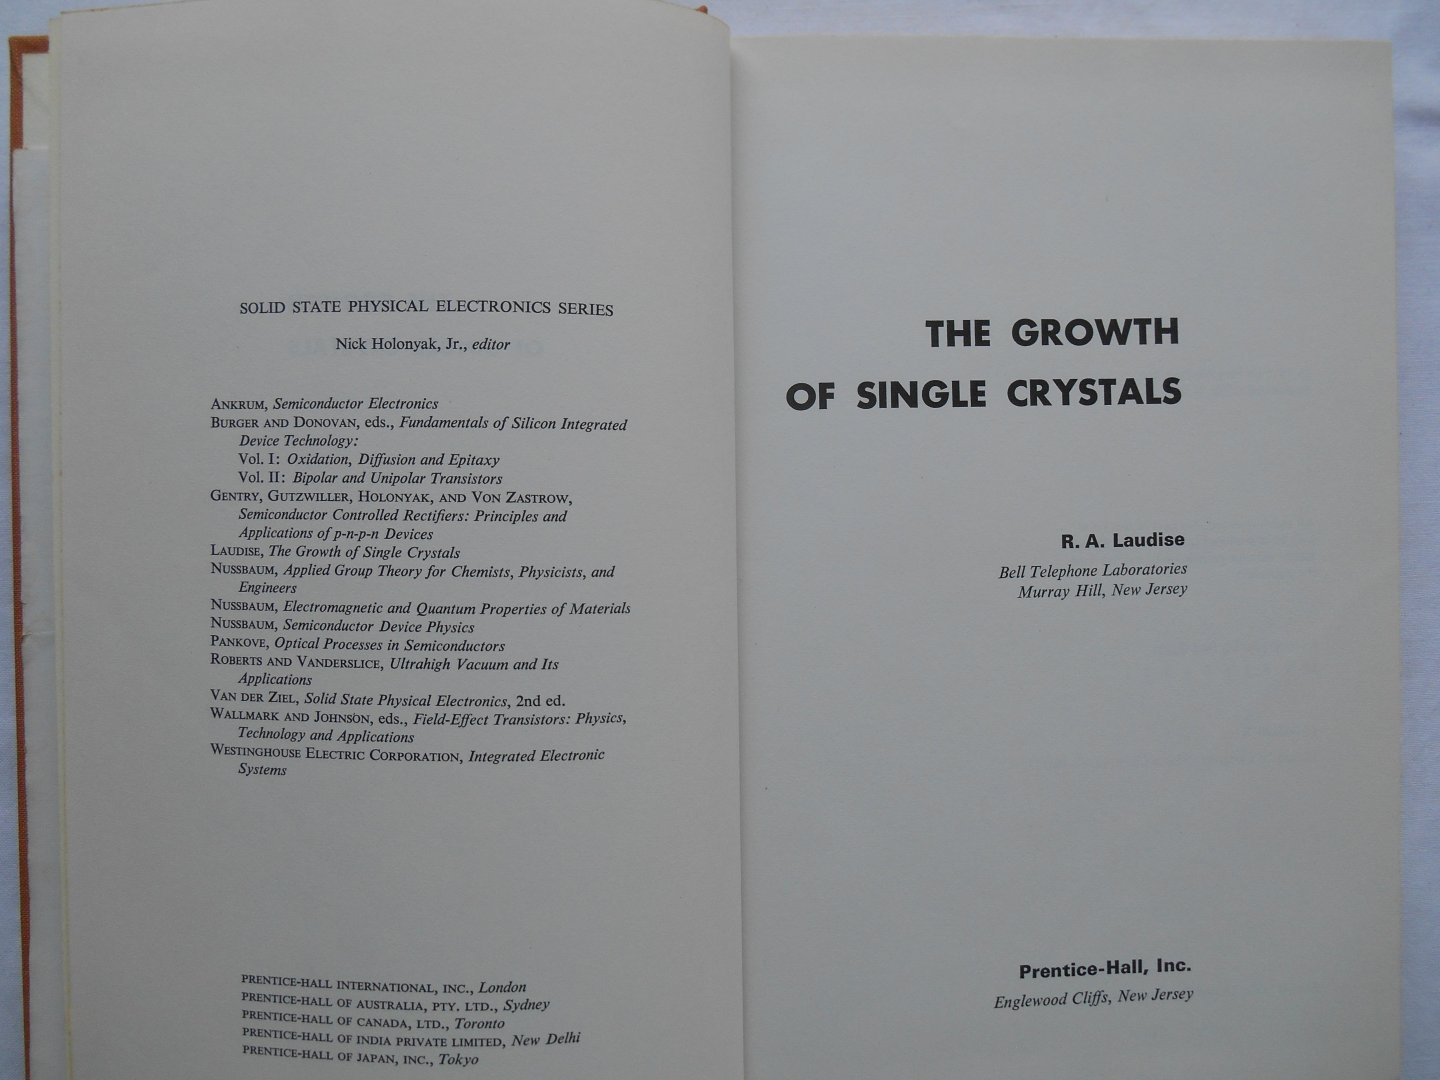 R.A. Laudise - The Growth of Single Crystals